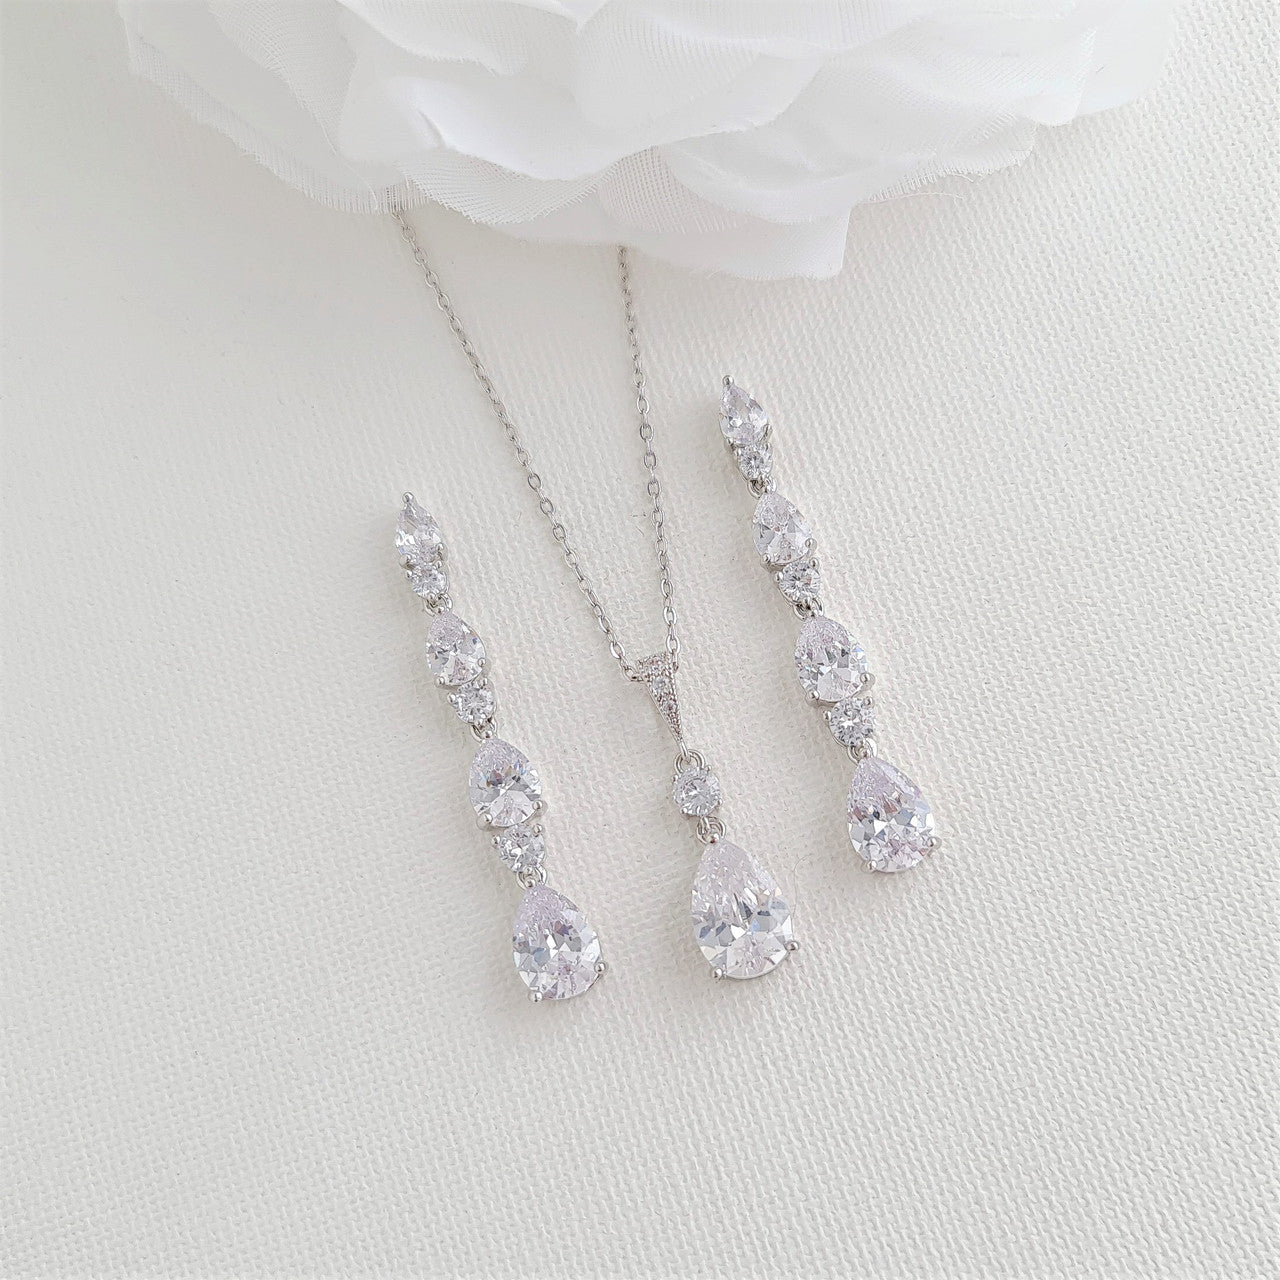 Silver Earrings and Necklace set for Weddings & Occasions, Brides & Women